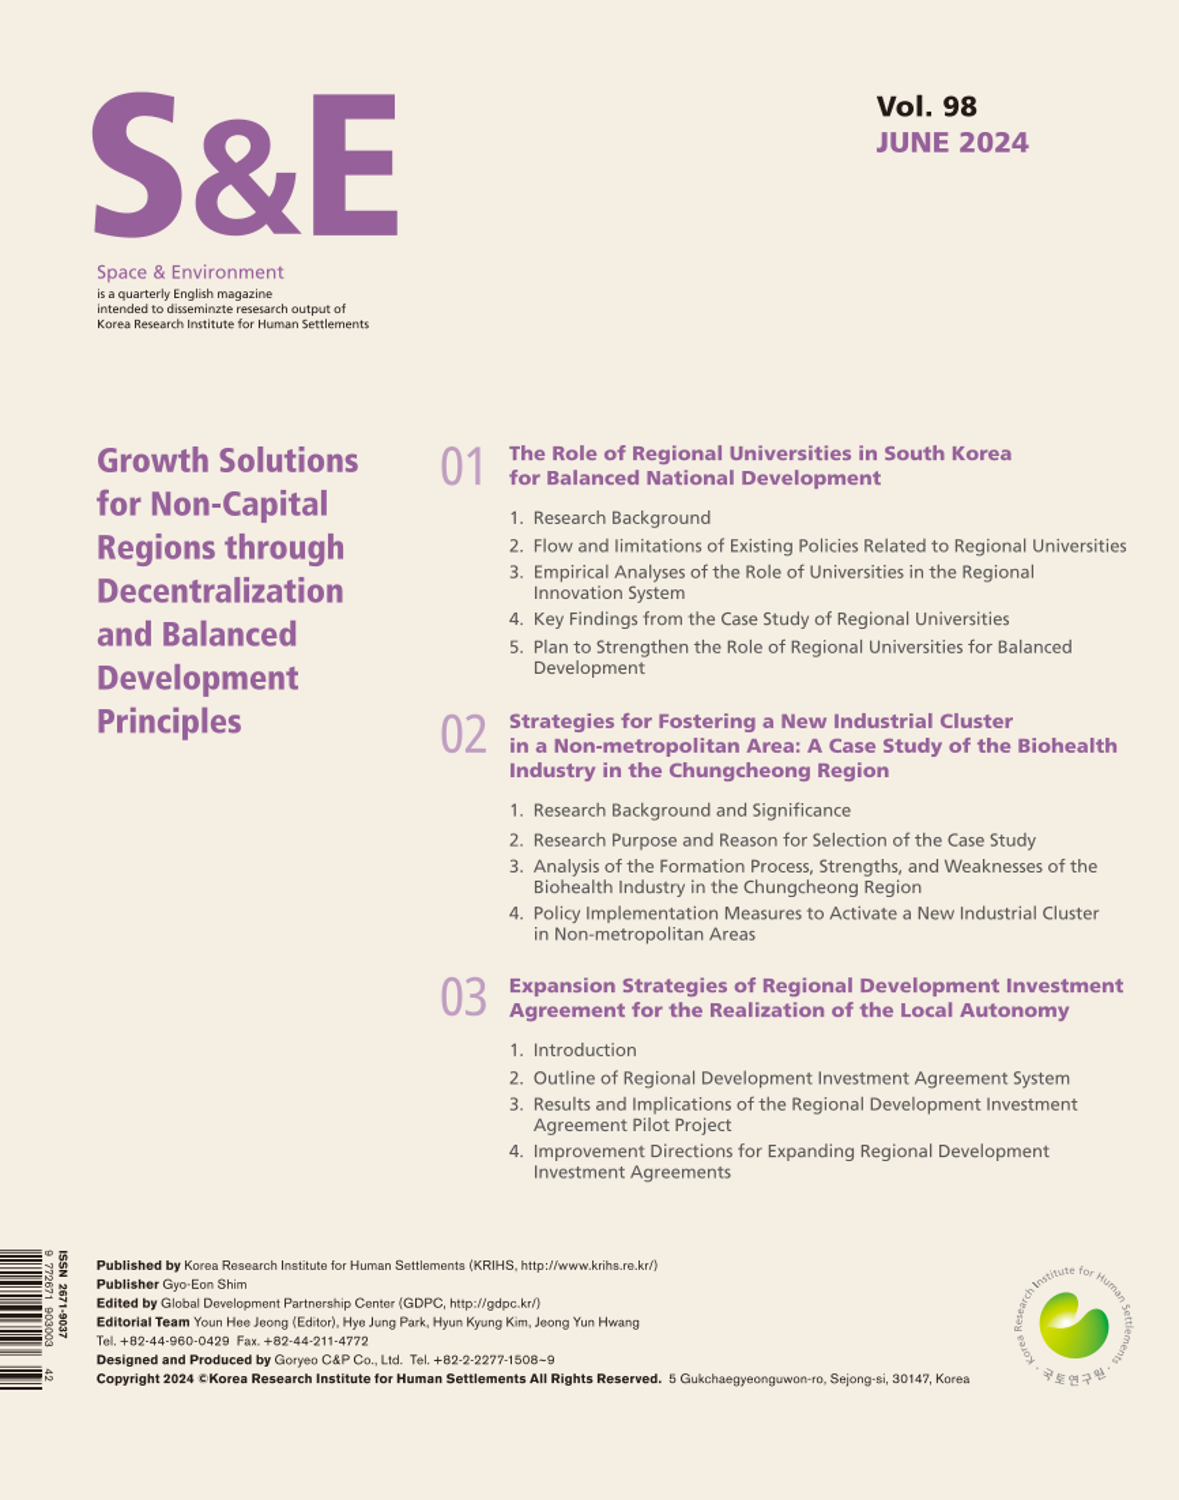 SPACE & ENVIRONMENT Vol.98 : Growth Solutions for Non-Capital Regions through Decentralization and Balanced Development Principles